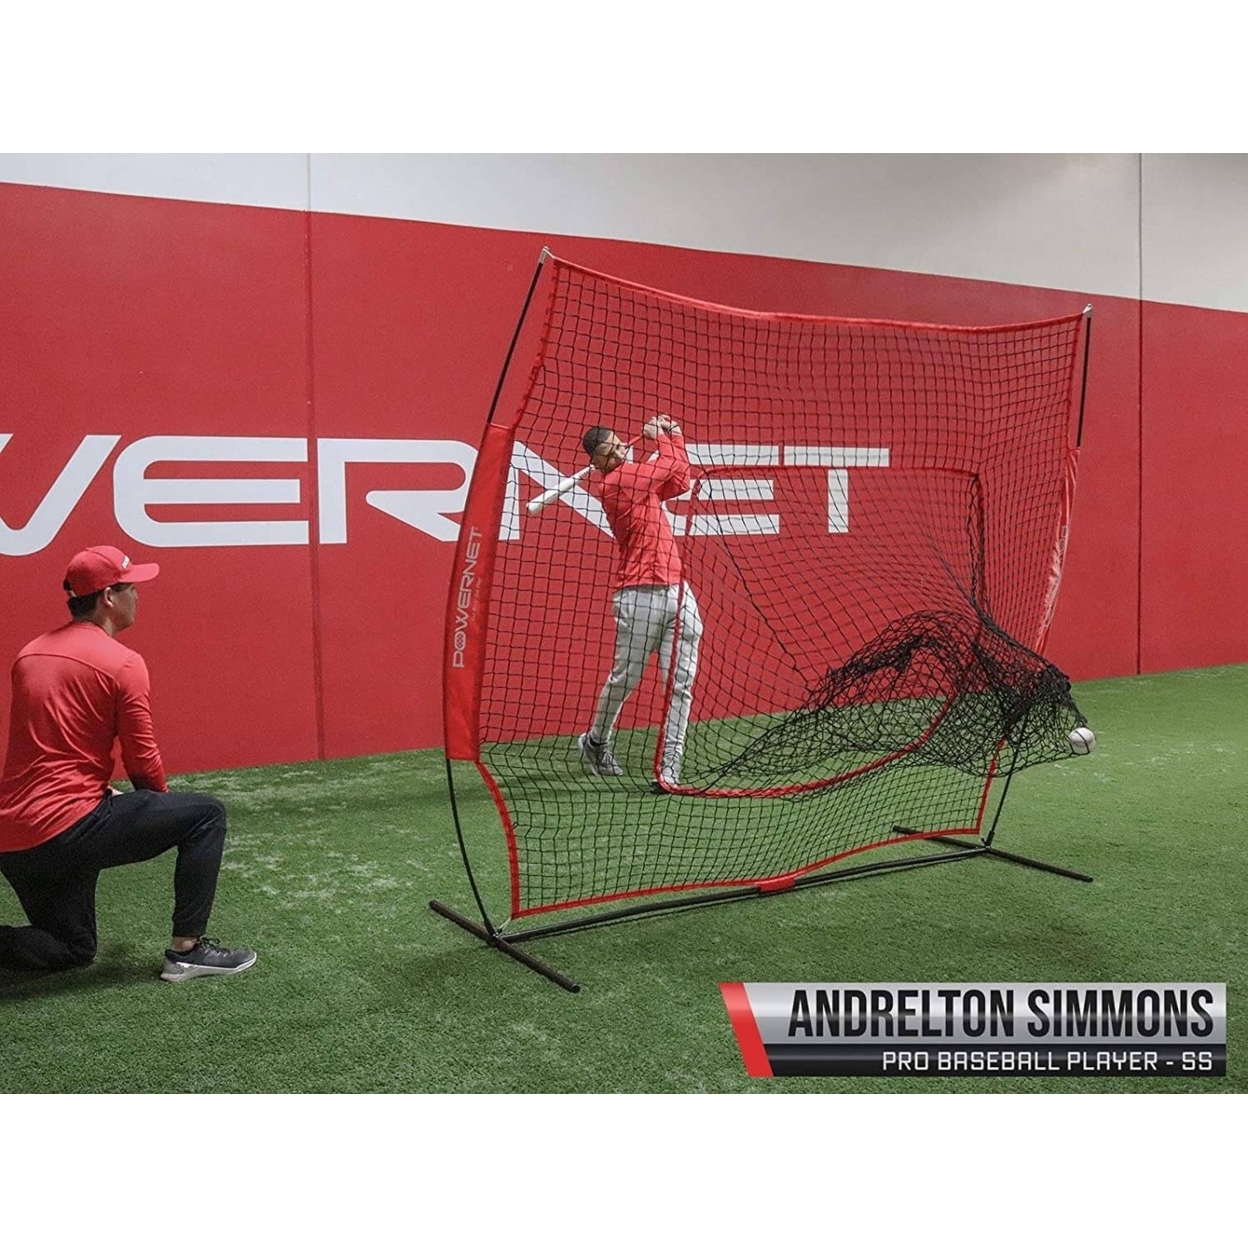 PowerNet DLX 7x7 Baseball Softball Hitting Net + Weighted Heavy Ball + Strike Zone Attachment + Carry Bag - Red